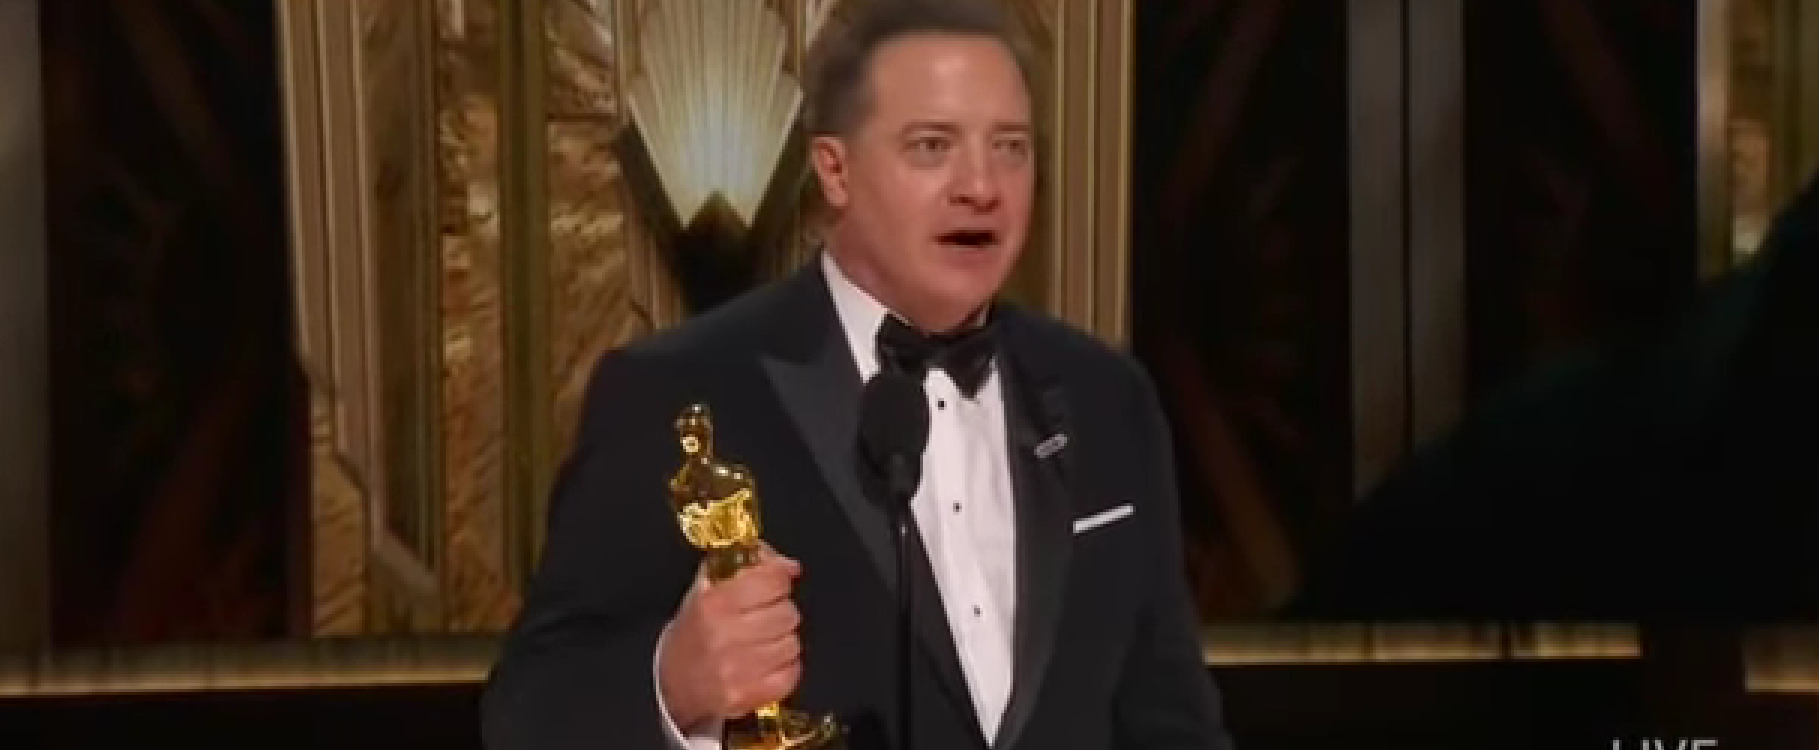 The Award For Most Emotional Oscars Acceptance Speech Goes To Brendan